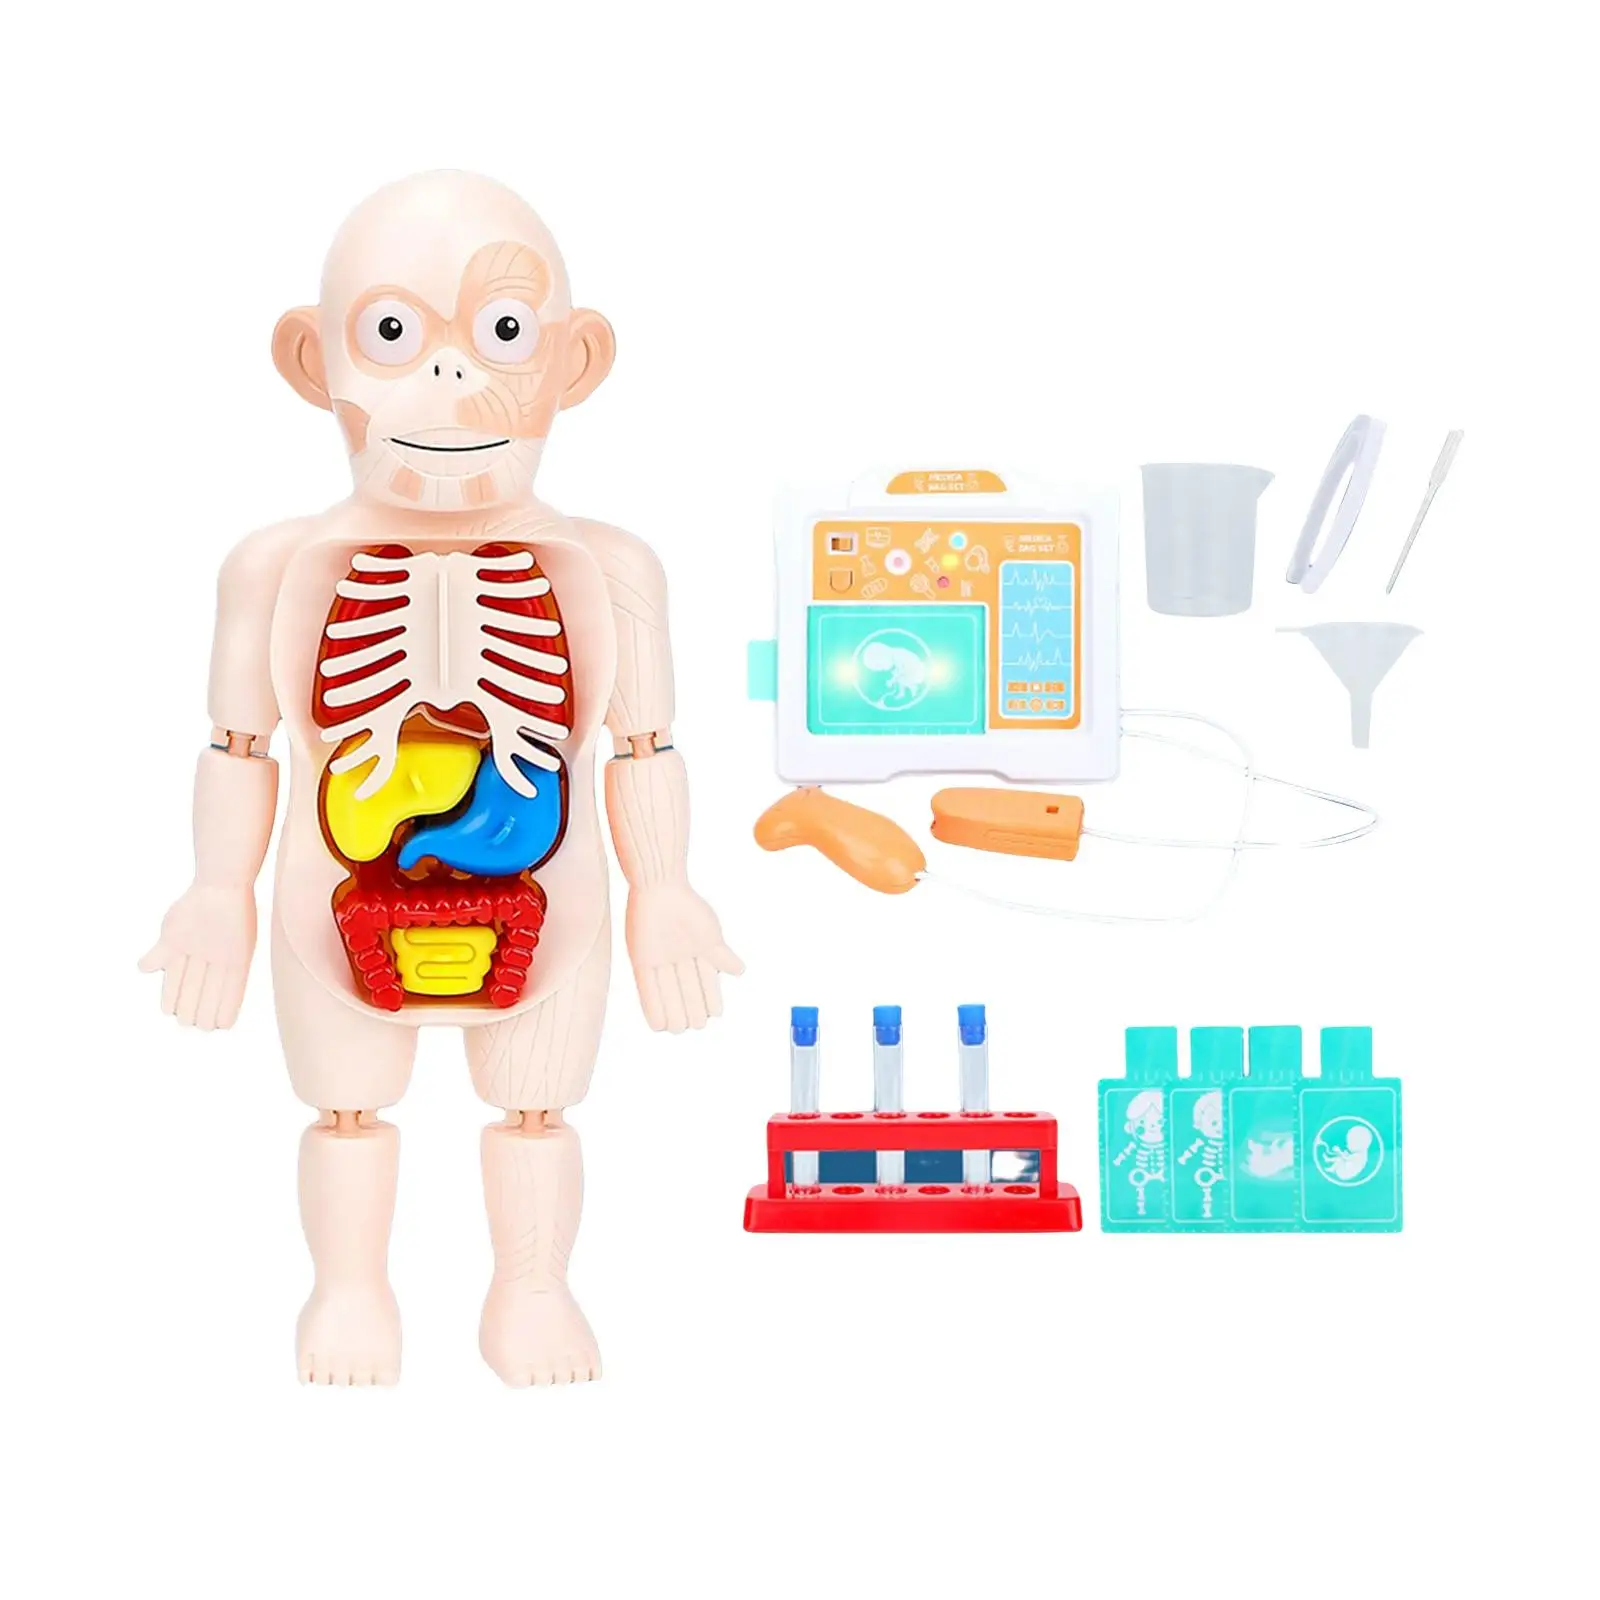 3D Human Body Model Cognition Toy Detachable Multipurpose Simulation Teaching Aids Body Puzzle for Demonstration Classroom